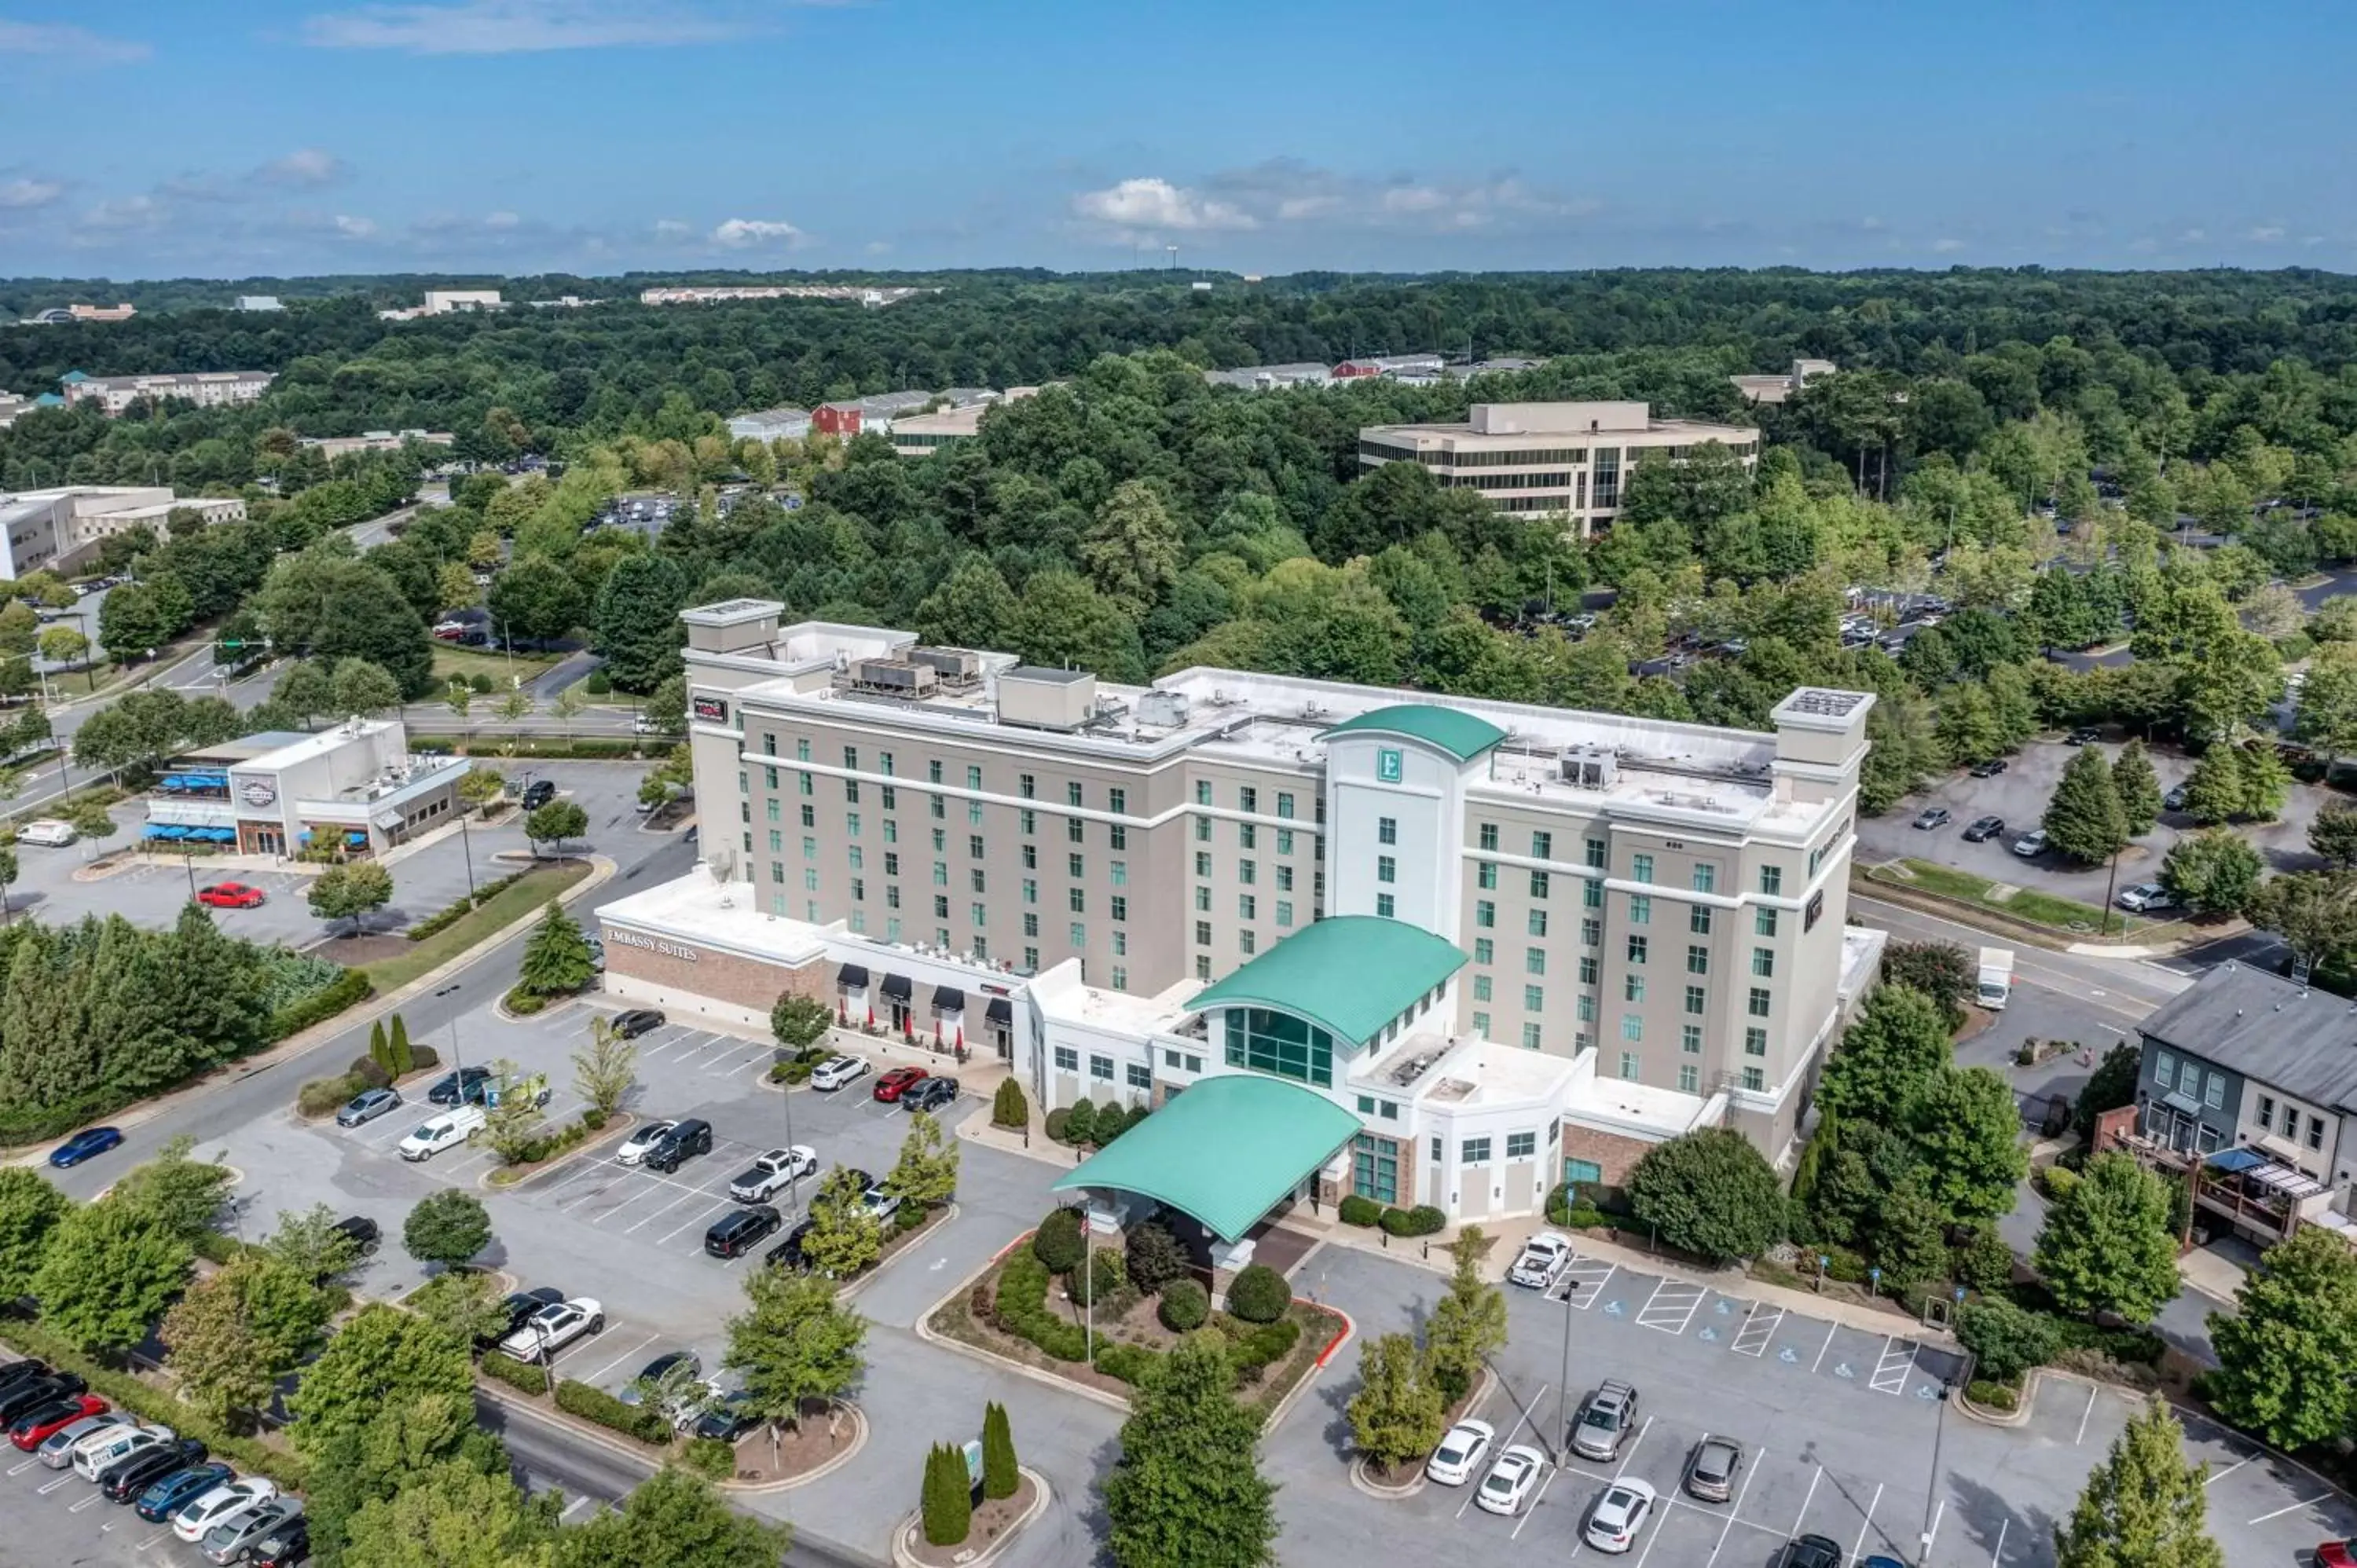 Property building, Bird's-eye View in Embassy Suites Atlanta - Kennesaw Town Center